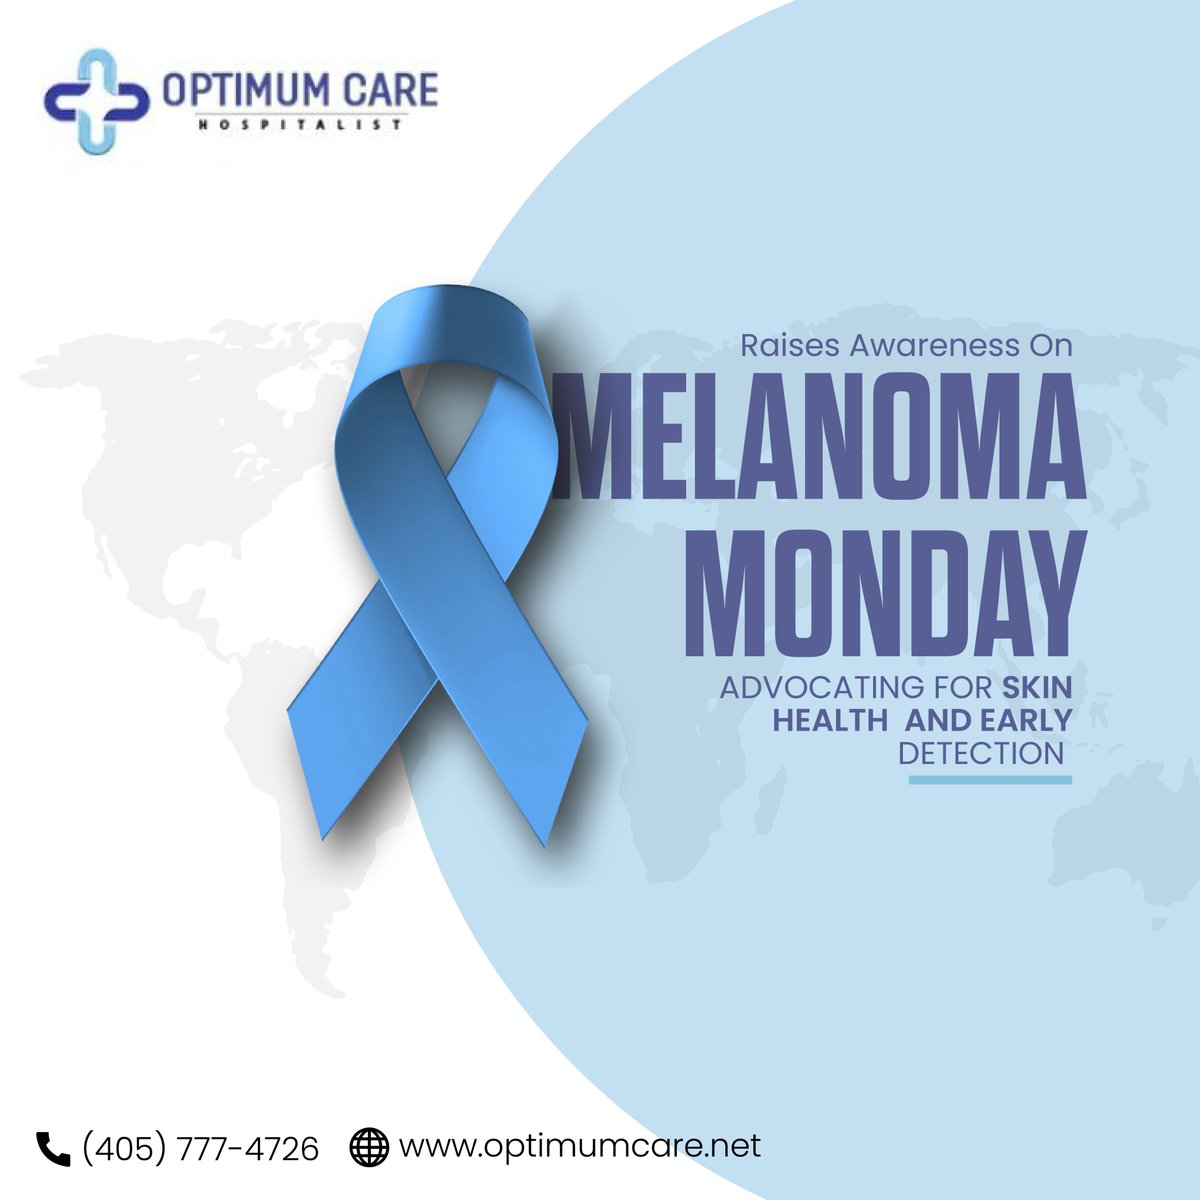 At Optimum Care Hospitalist, we prioritize raising awareness on Melanoma Monday, dedicating our efforts to advocating for skin health and early detection of melanoma.
#OptimumCareHospitalist #MelanomaMonday #SkinHealth #EarlyDetection #SkinCancerAwareness